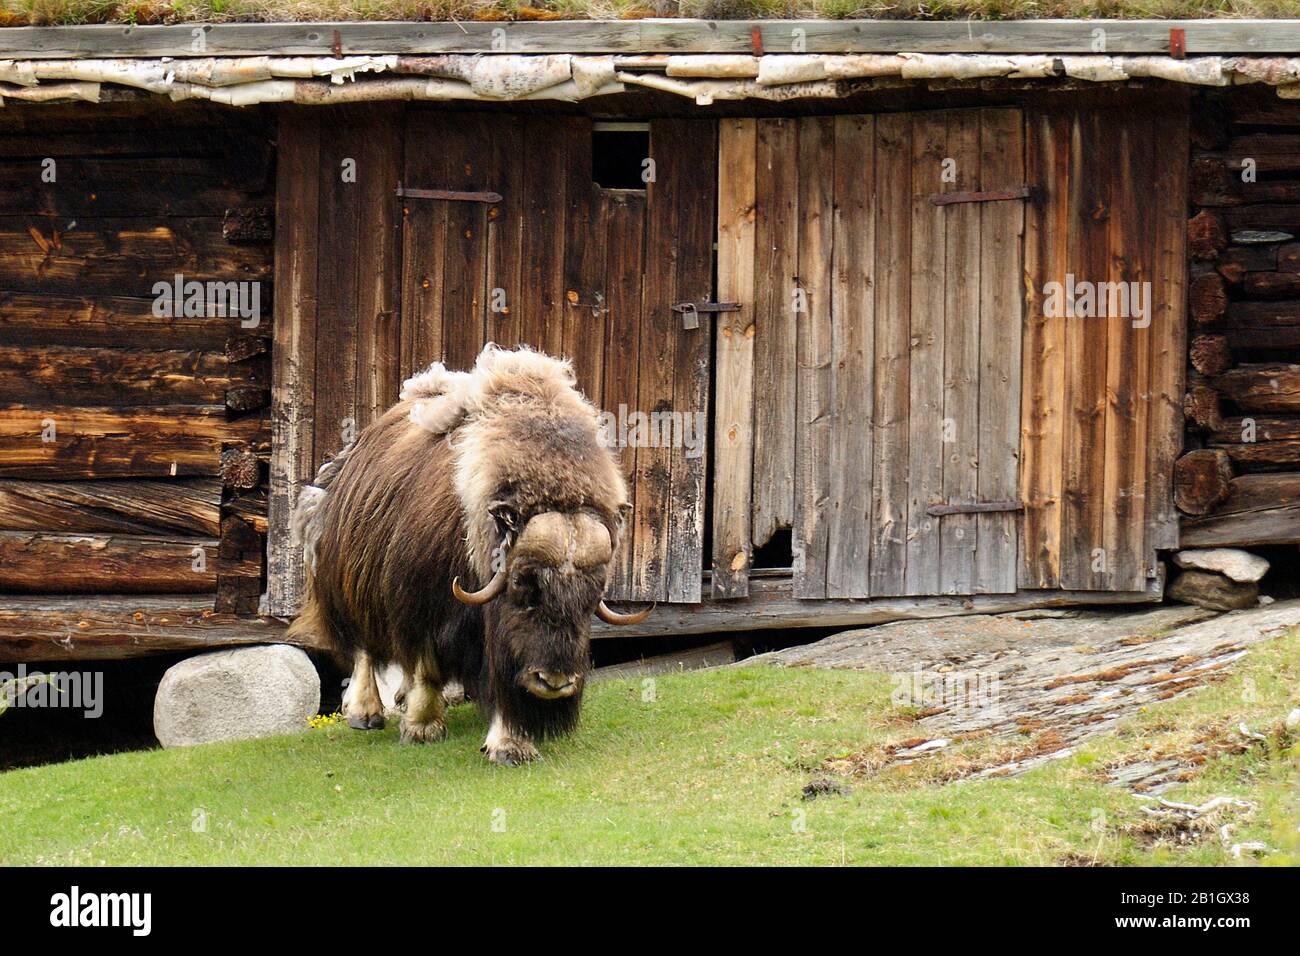 Muskox (Ovibos moschatus), in front of a wooden hut, Norway Stock Photo